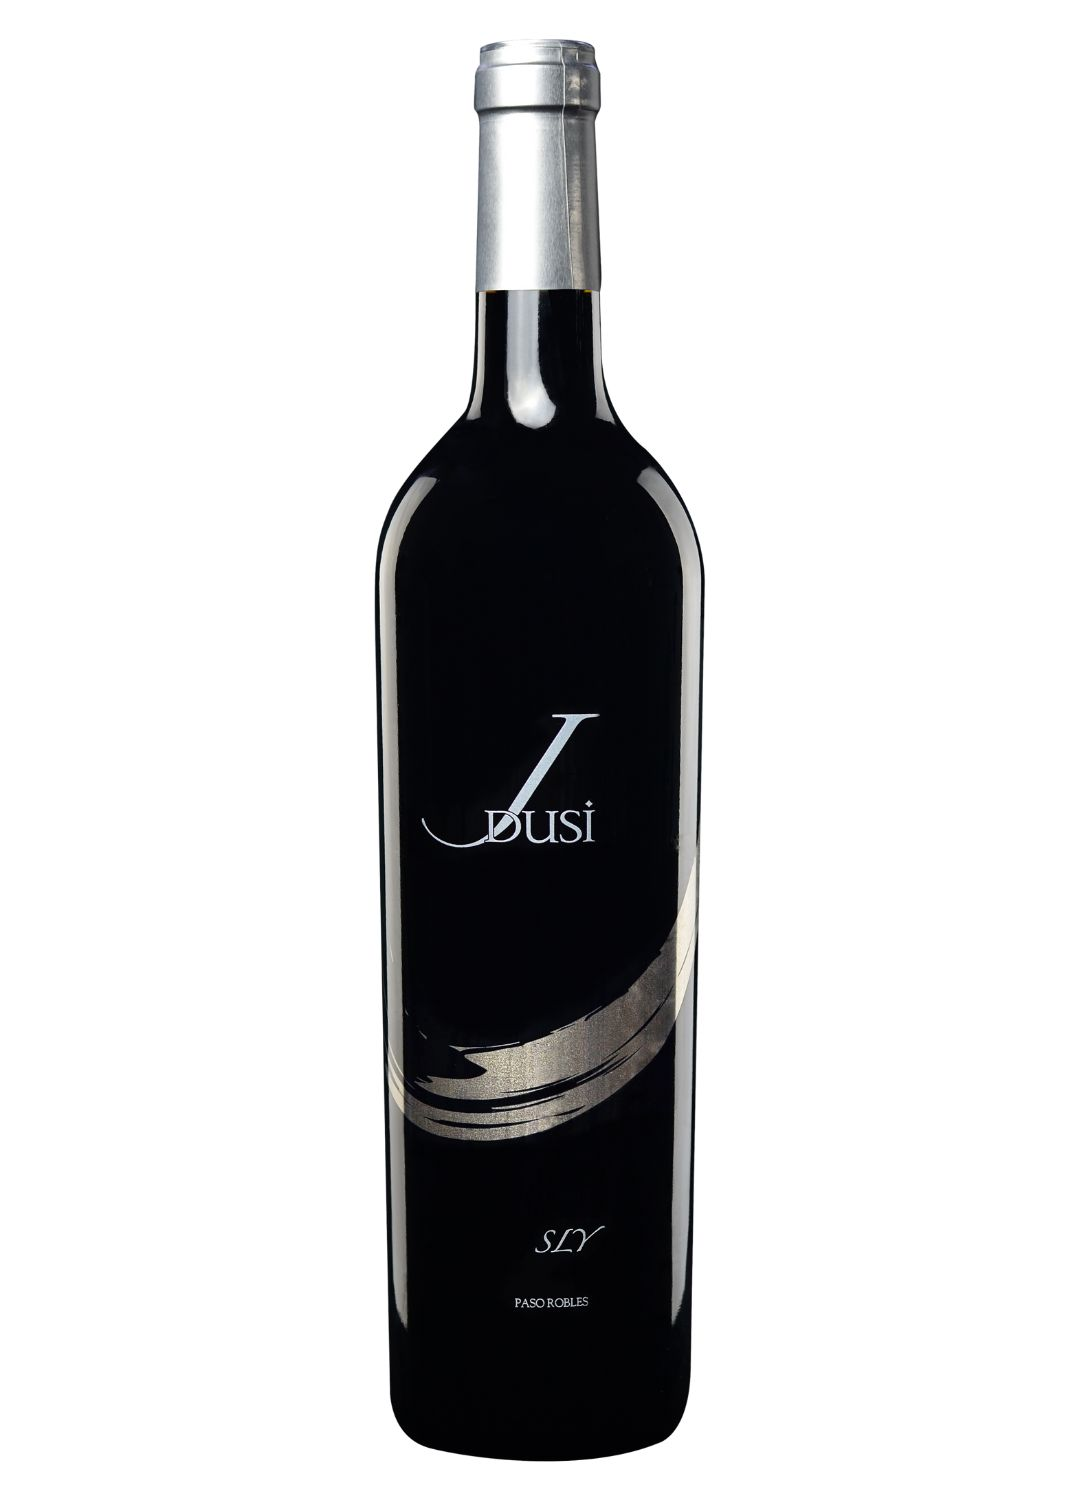 Bottle of SLY from J Dusi Wines